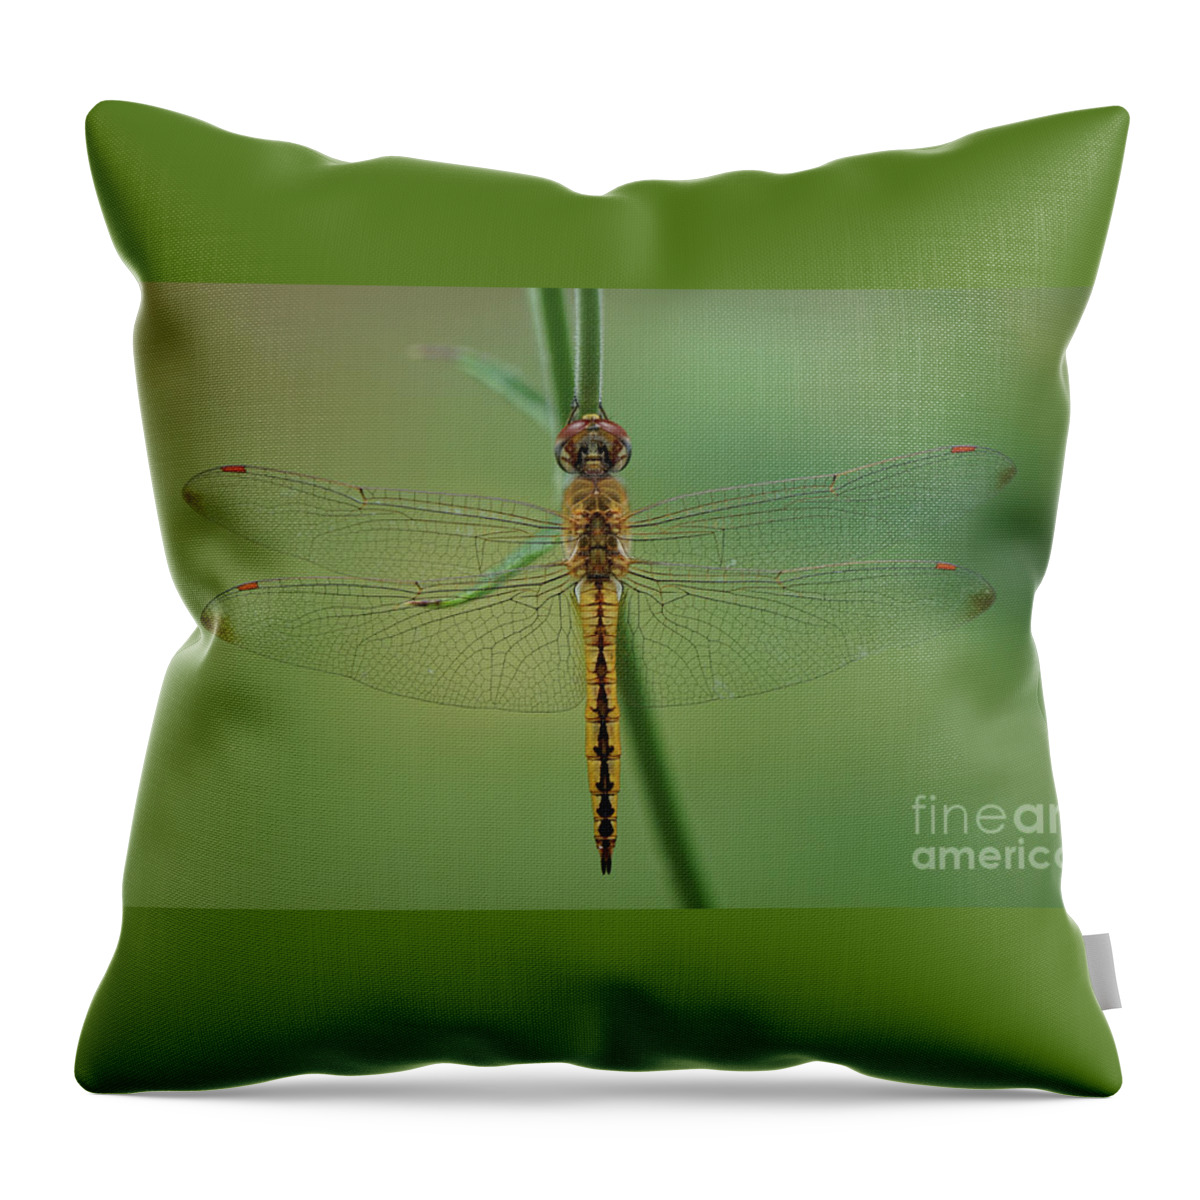 Dragonfly Throw Pillow featuring the photograph Dragonfly Gold by Robert E Alter Reflections of Infinity